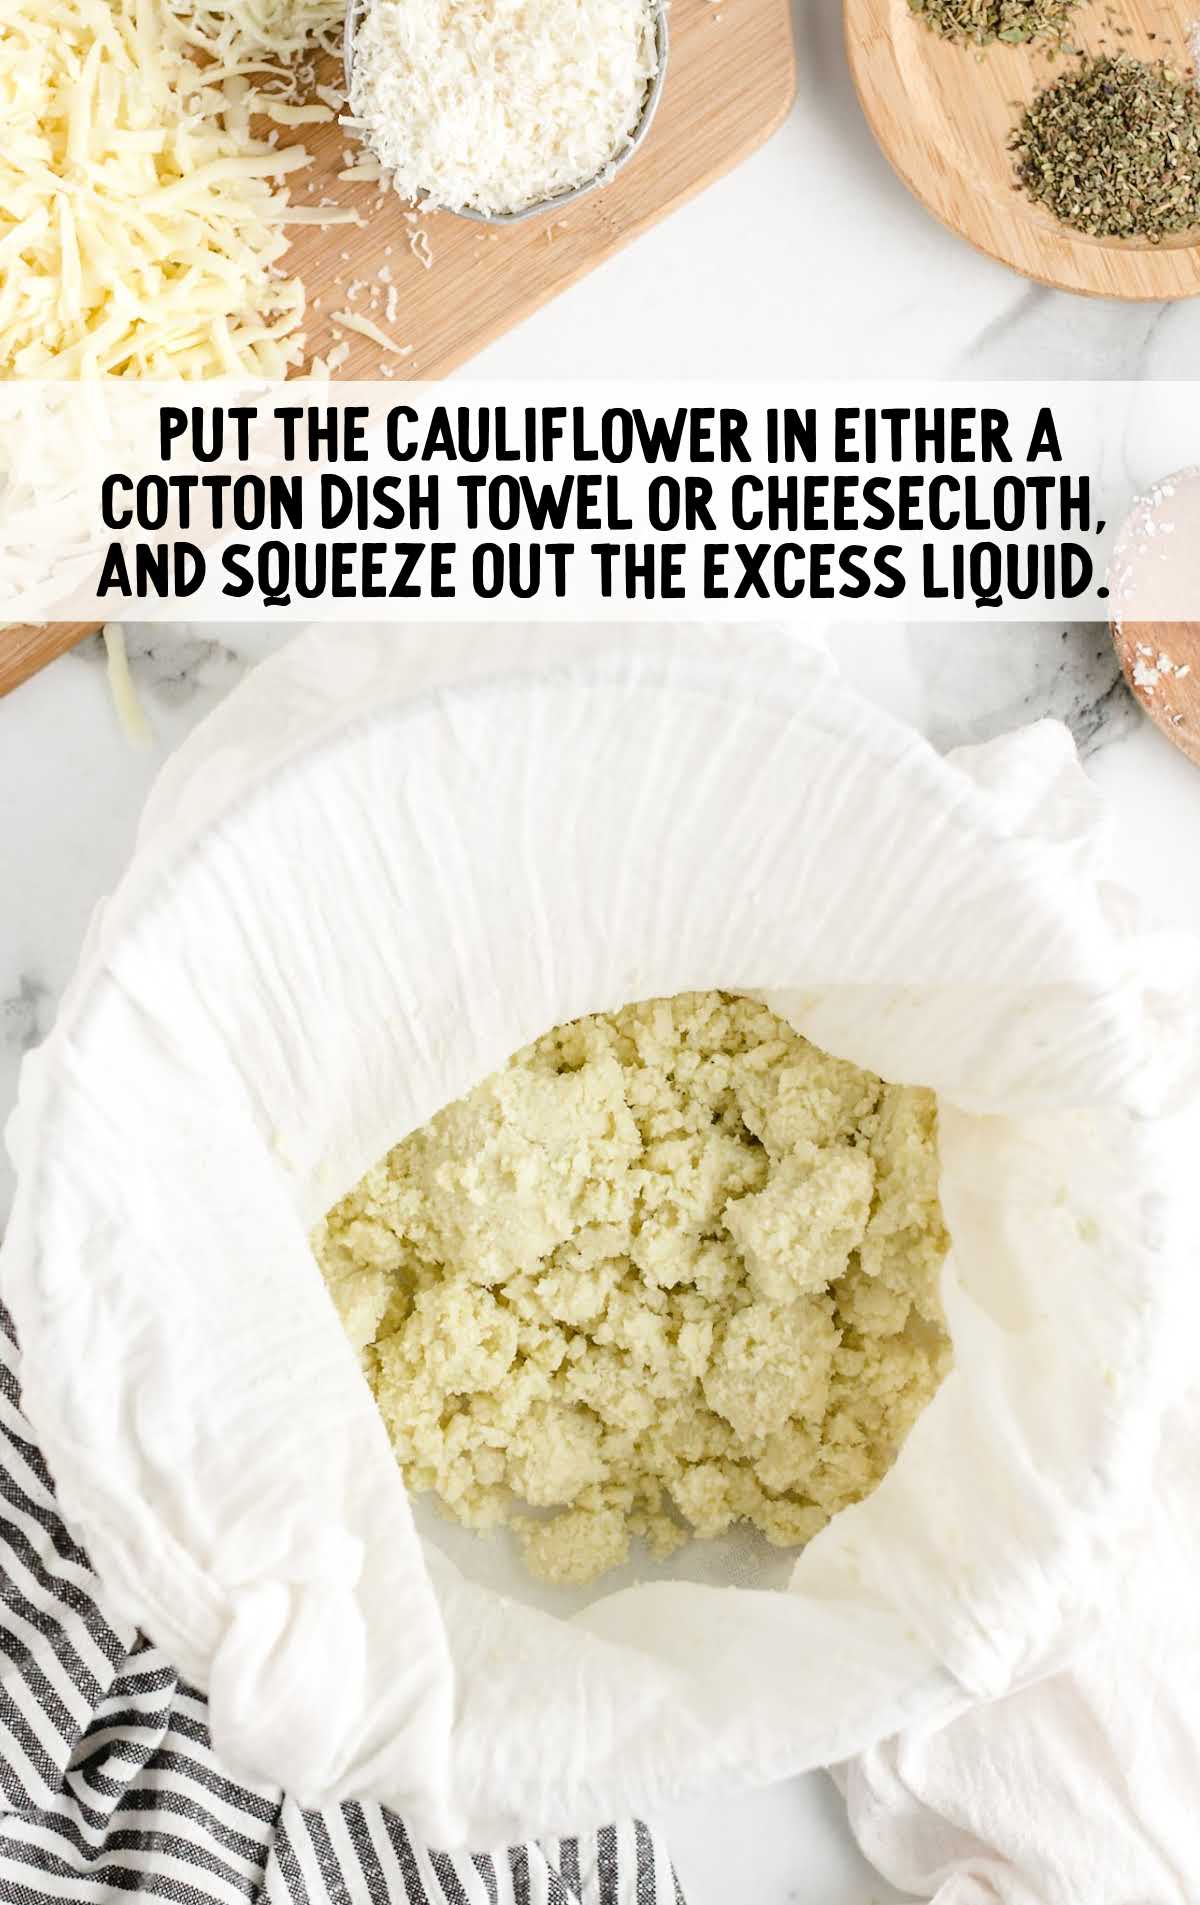 excess liquid squeezed out of the cauliflower with a cotton dish towel